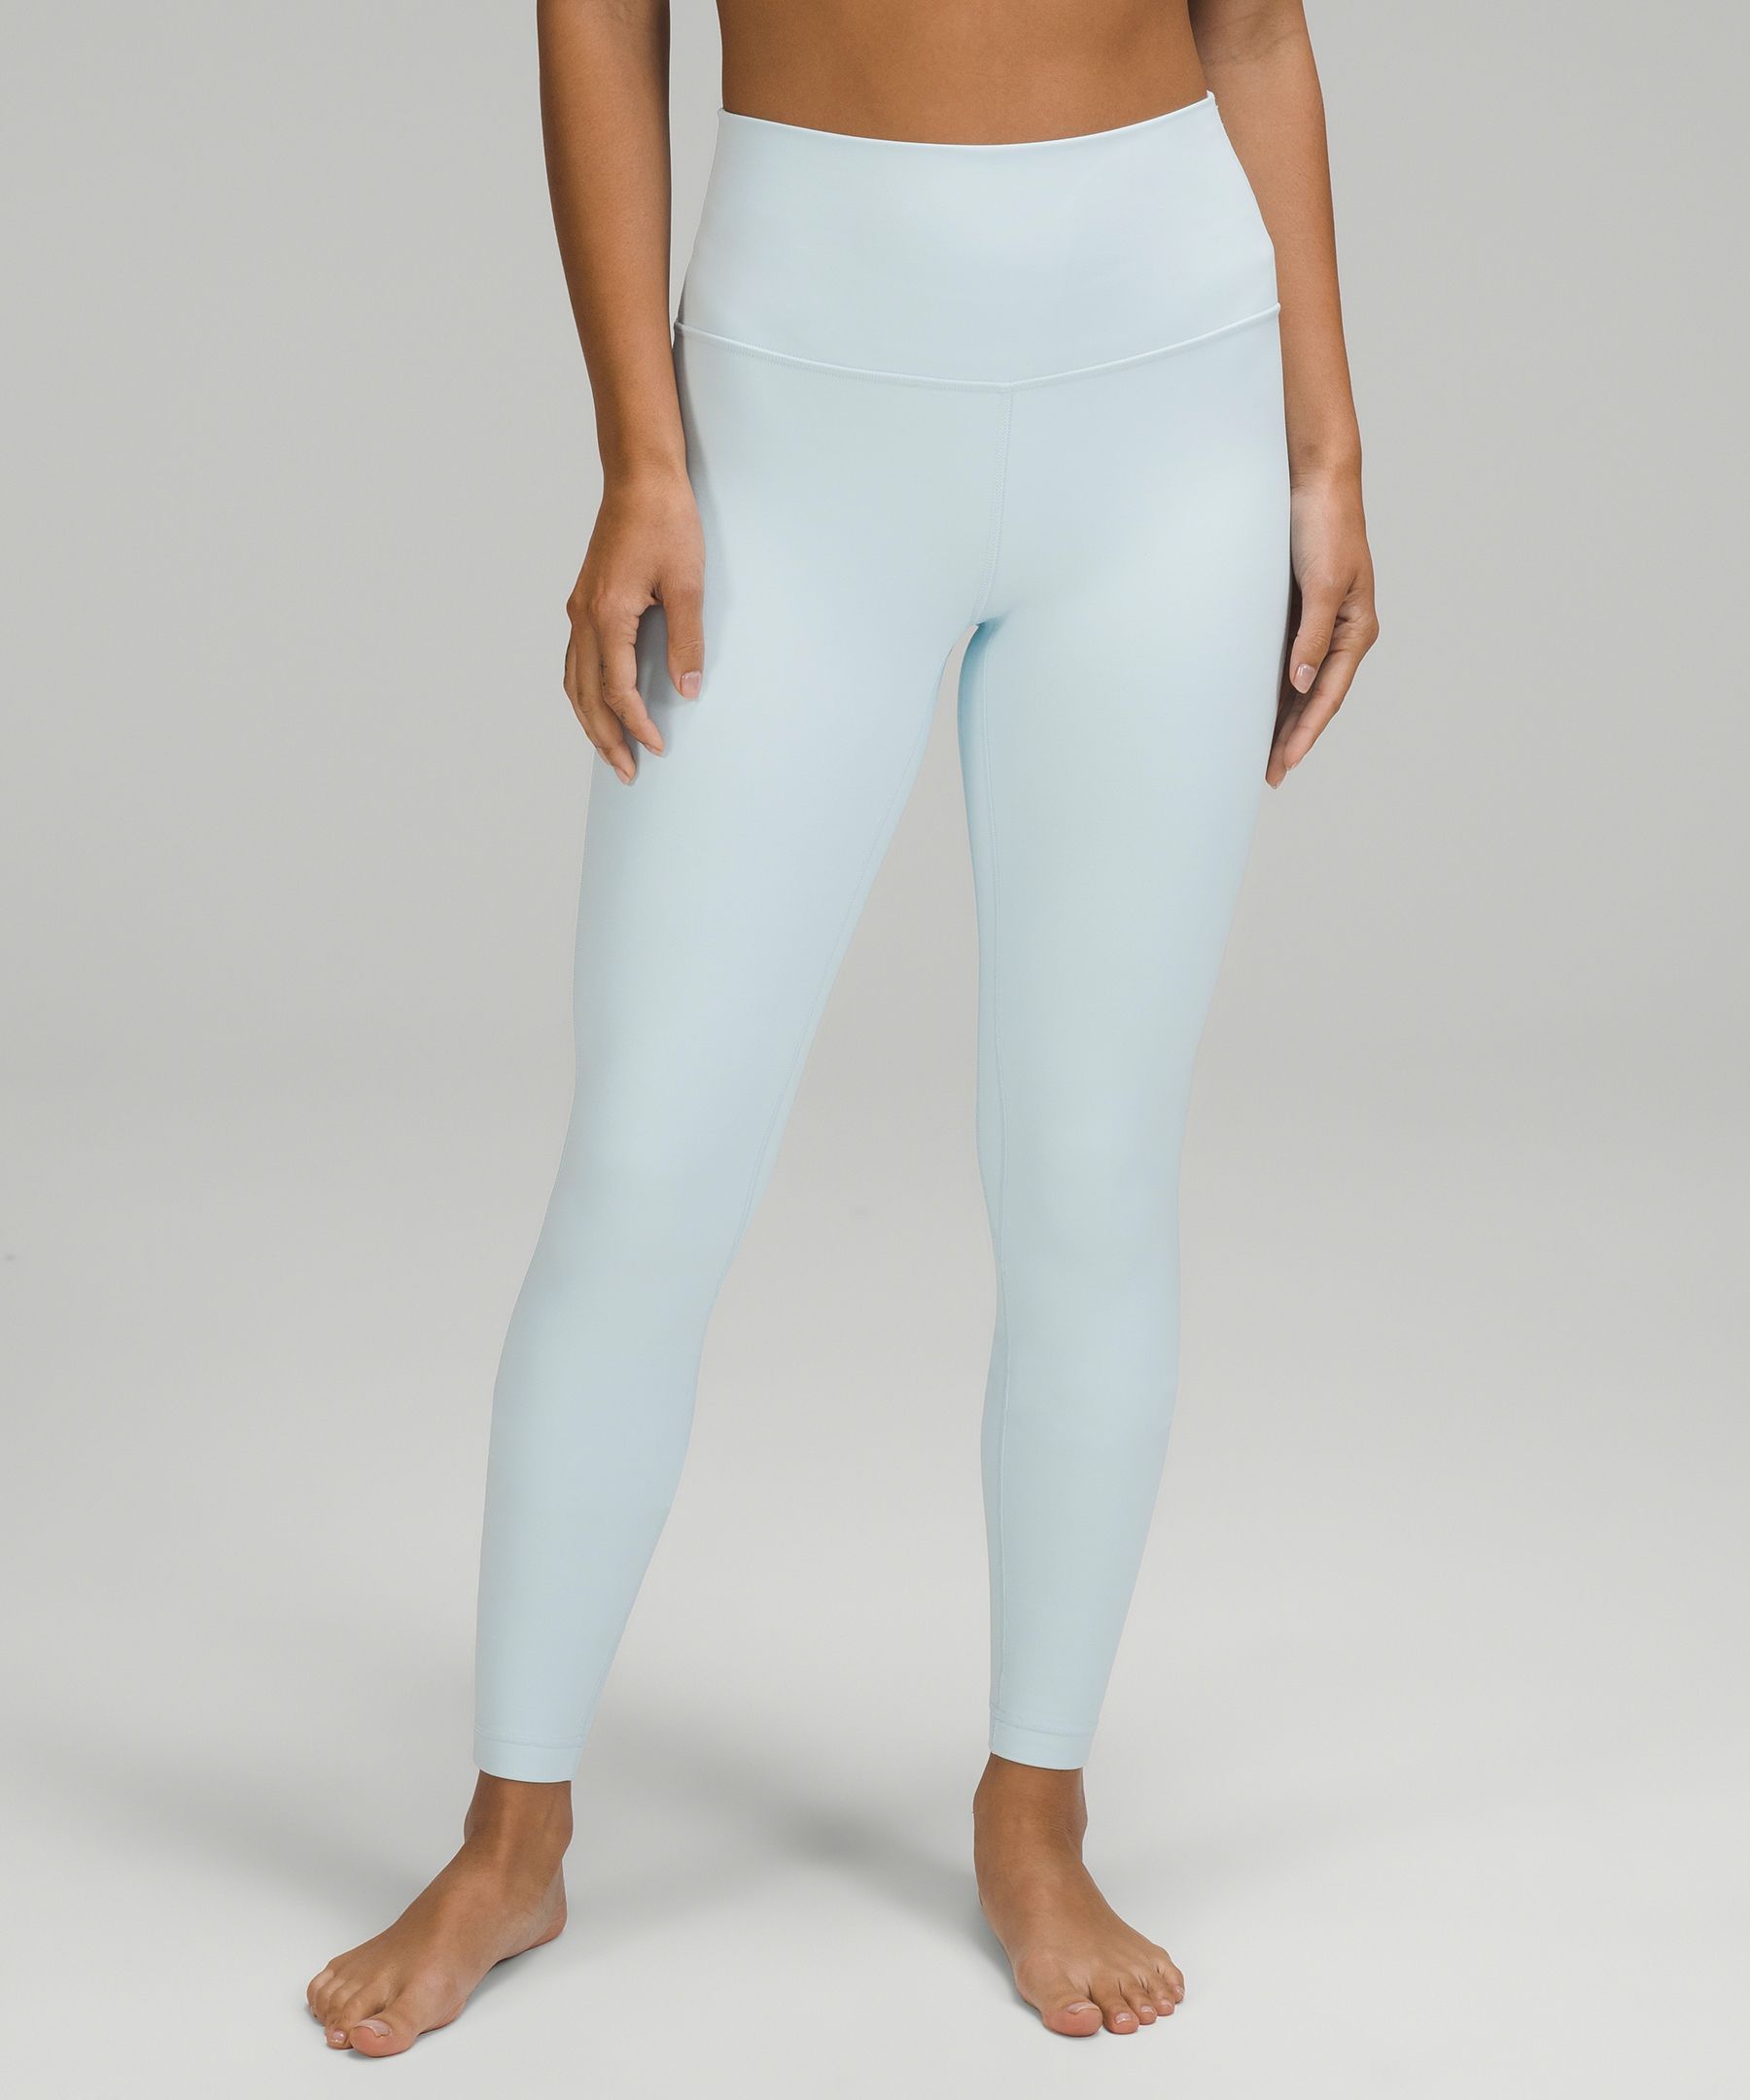 lululemon Women's Align High-Rise Pant 28 (Various Colors) $69 + Free  Shipping